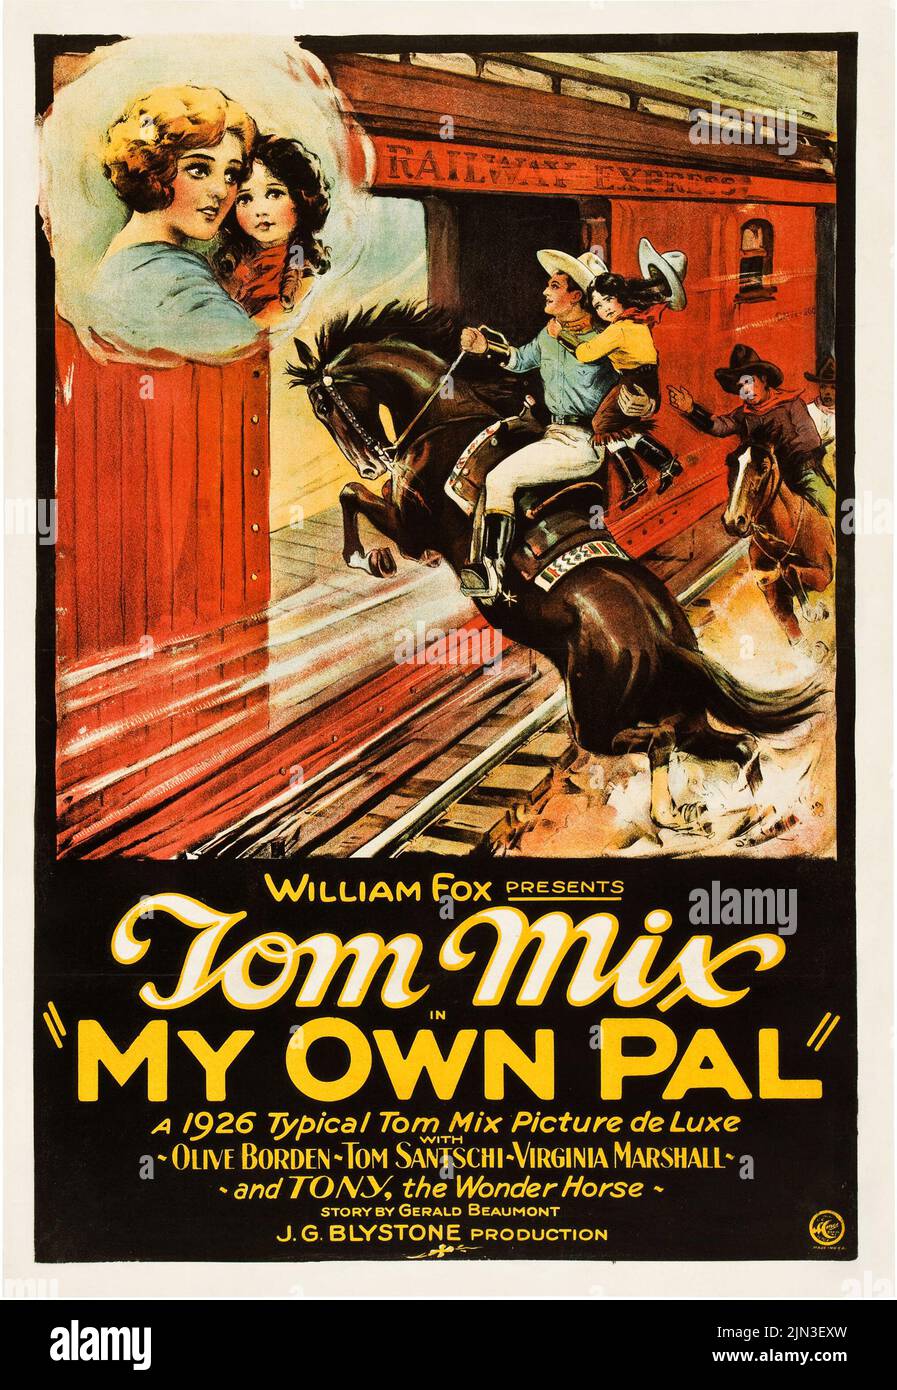 Vintage movie poster for the 1926 film My Own Pal starring Tom Mix Stock Photo